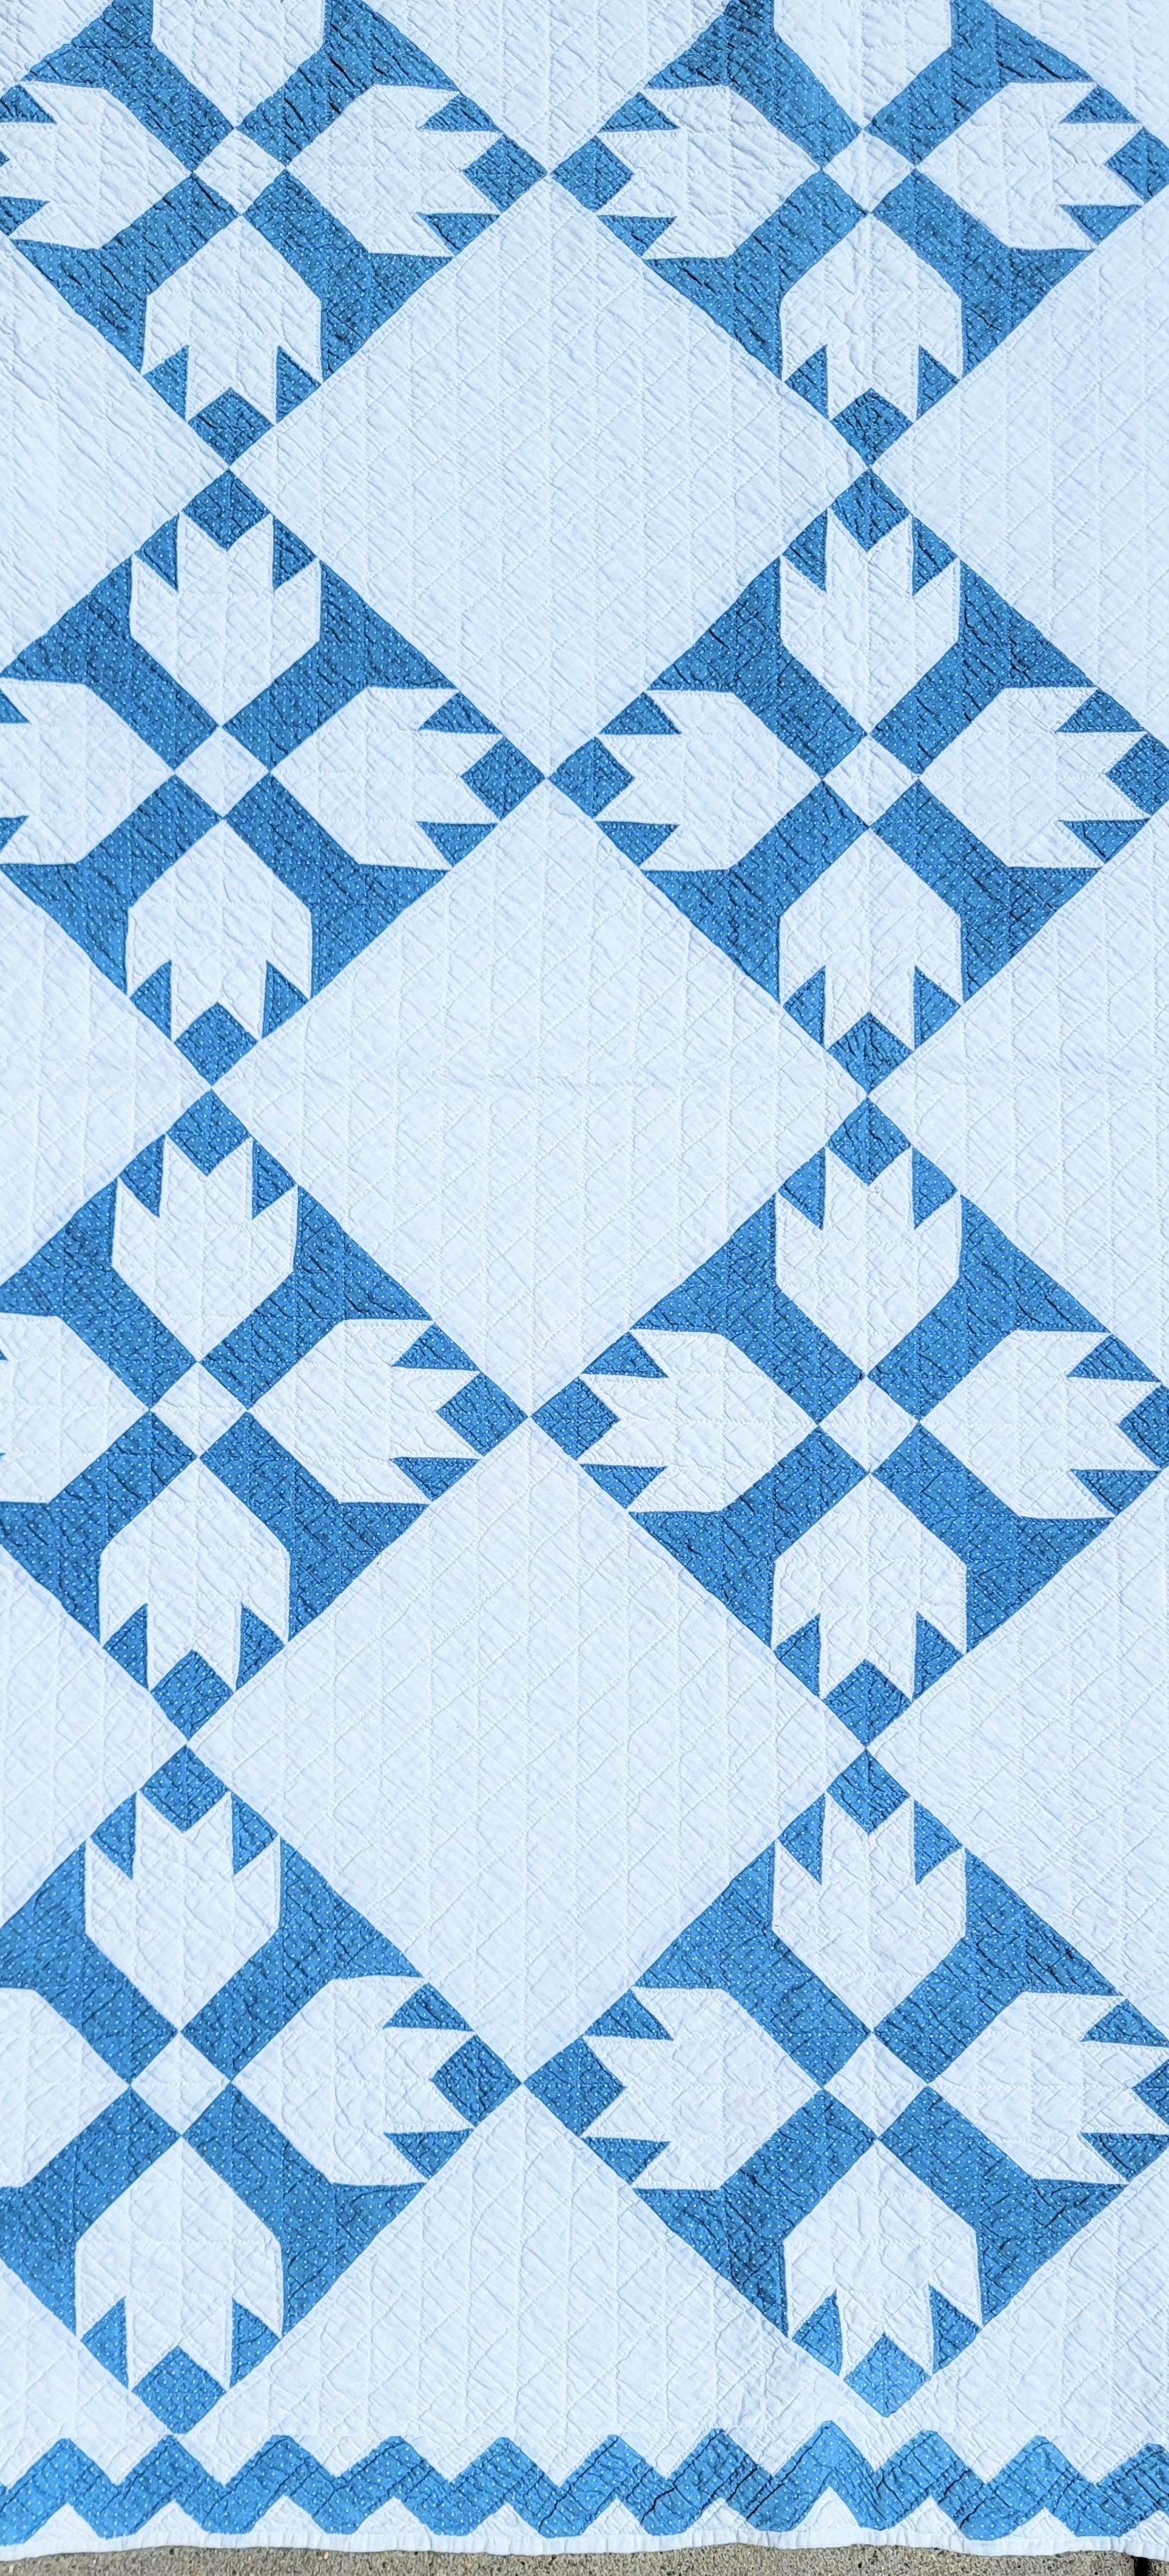 Adirondack 19thc Robin Egg Blue Calico Bear Paw Quilt For Sale